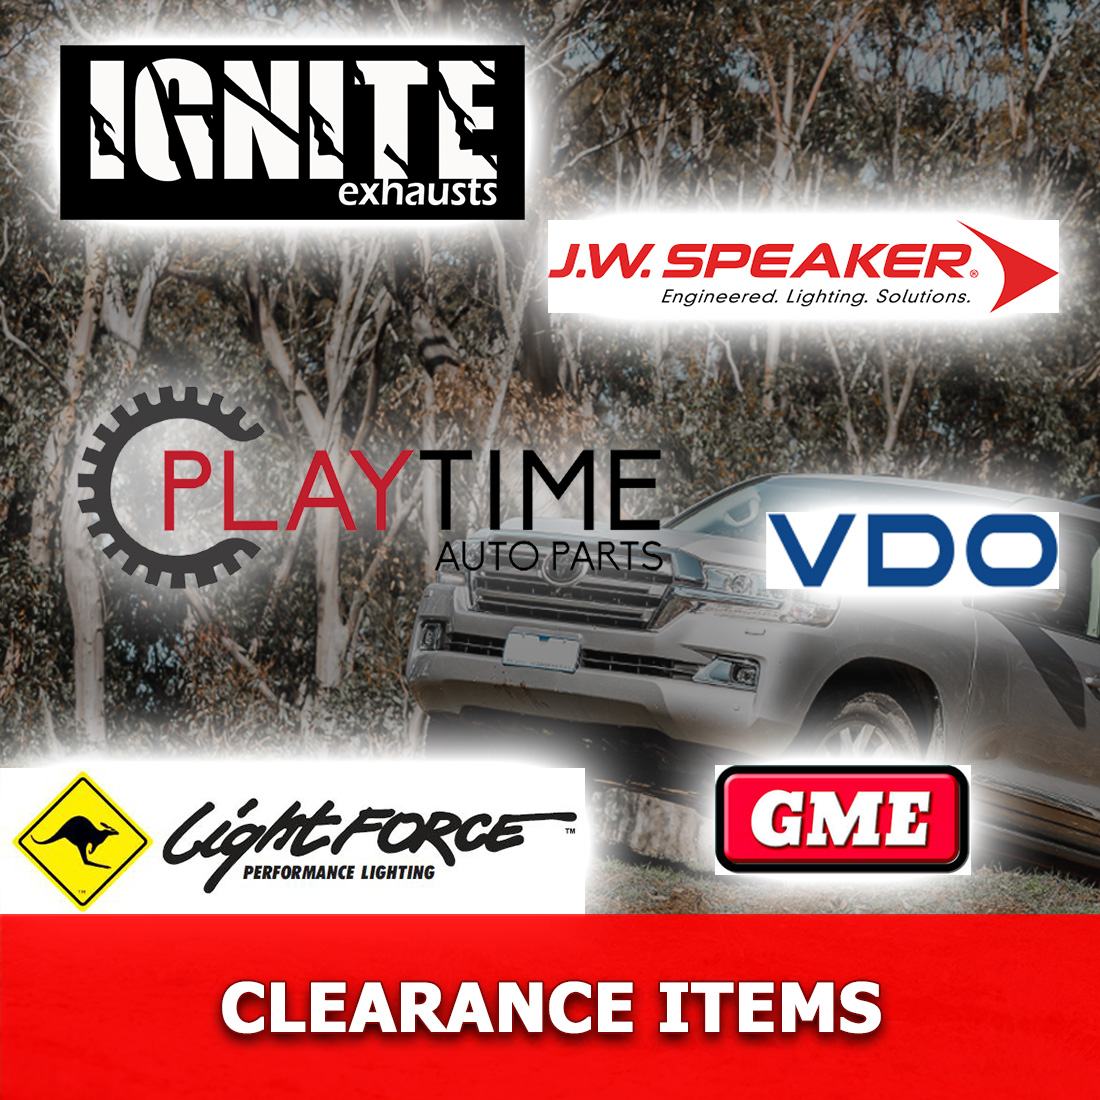 Playtime Auto Parts. Clearance Items.